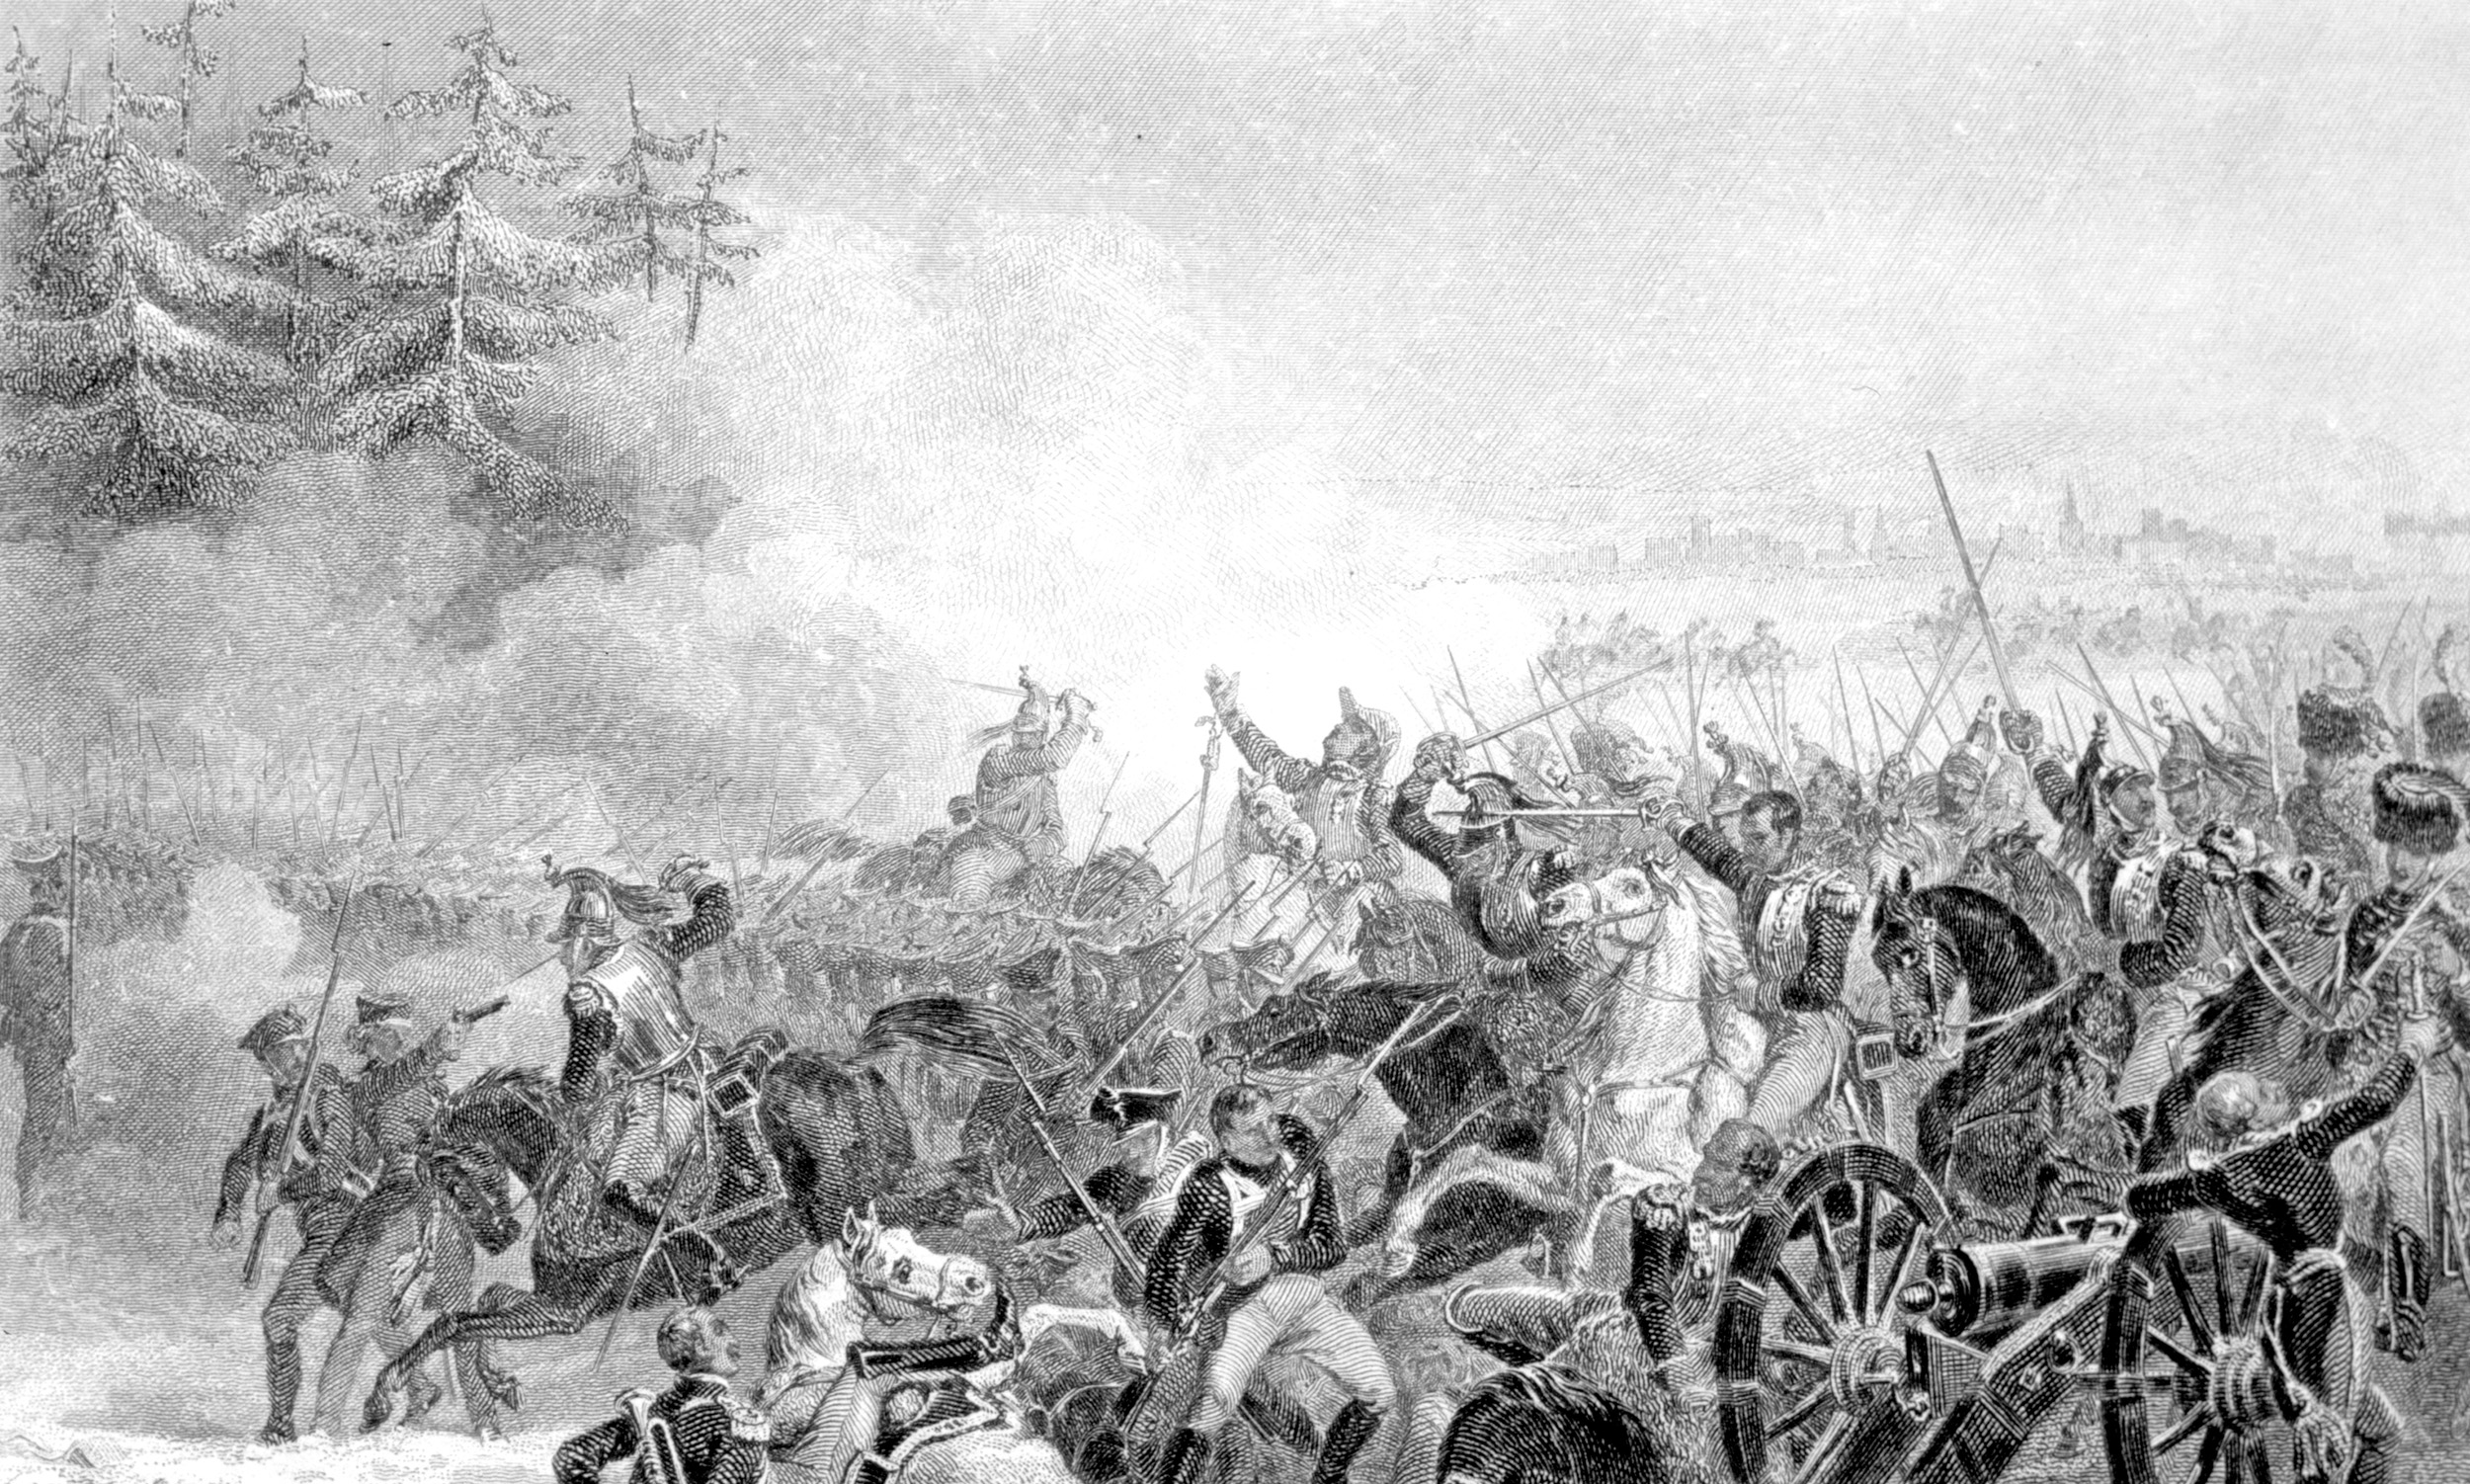 French cuirassiers bear down on Russian infantry at the height of the battle, turning back an advance that might have wrecked the French line. 